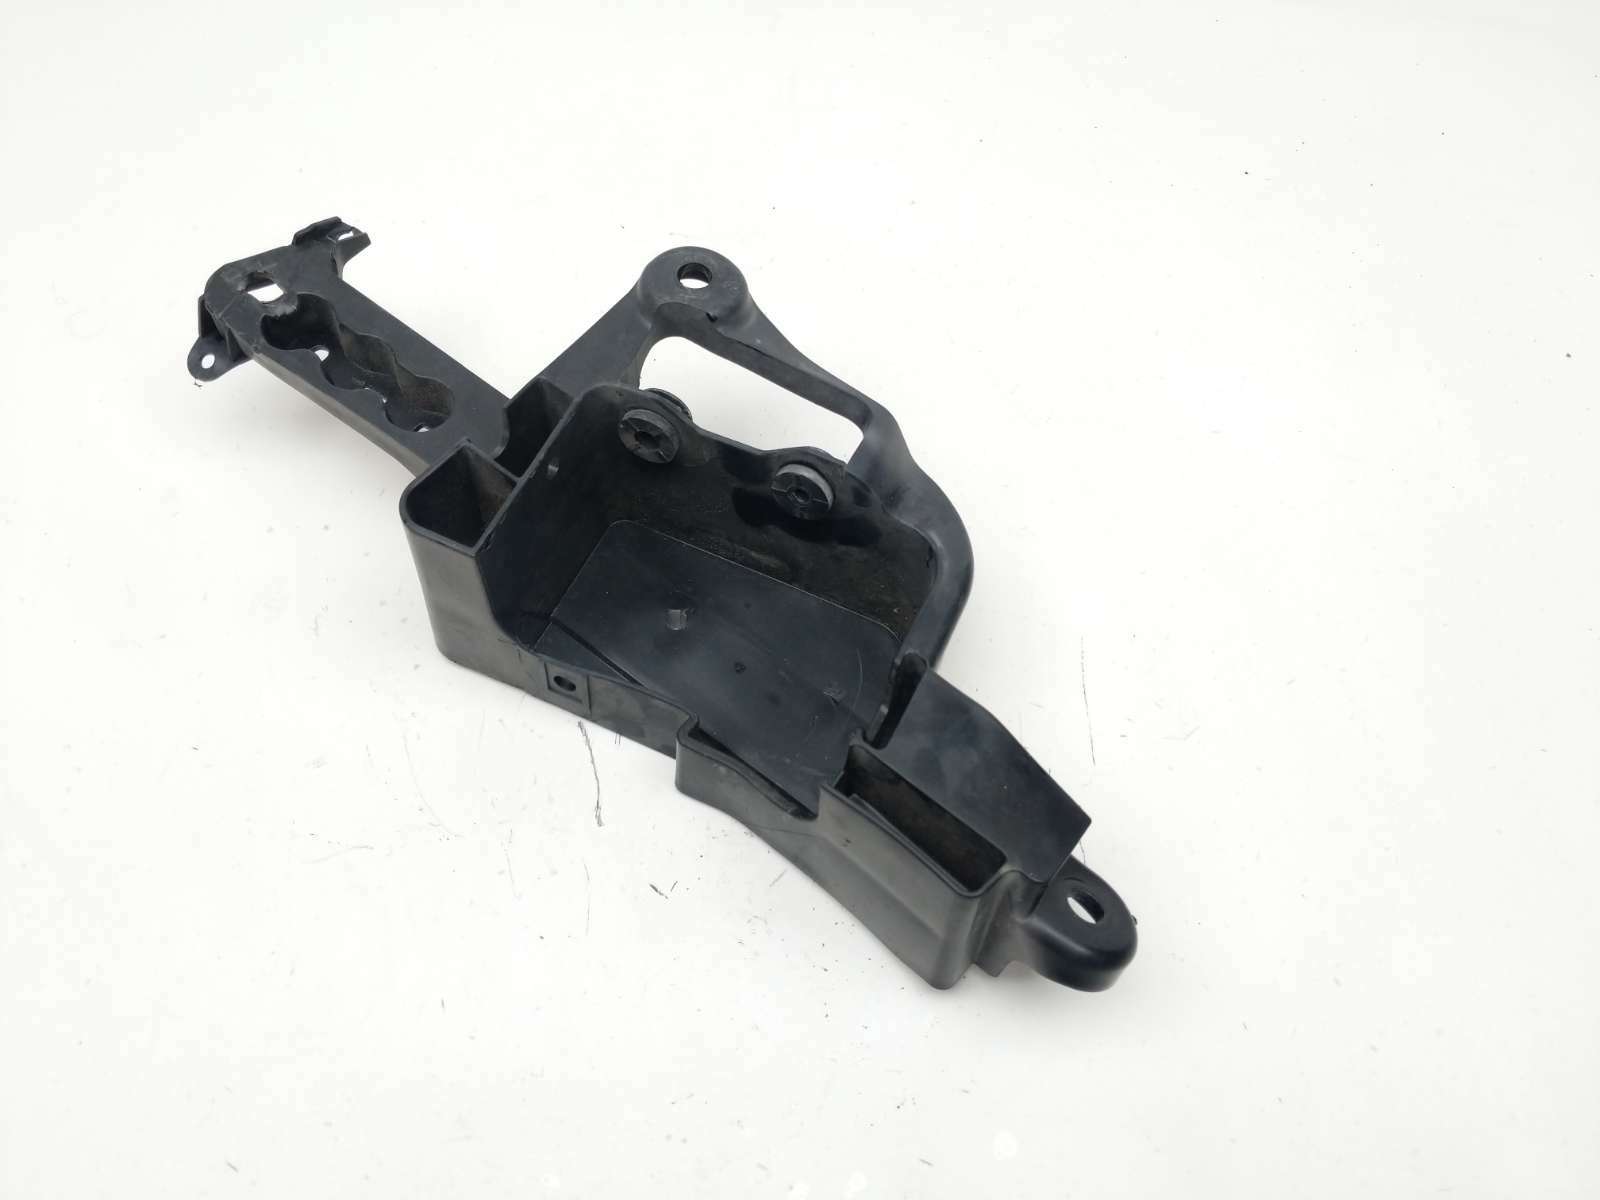 14 Honda CTX1300A CTX 1300 Right Side Stay Support Mount Bracket 64510-MJN-A000